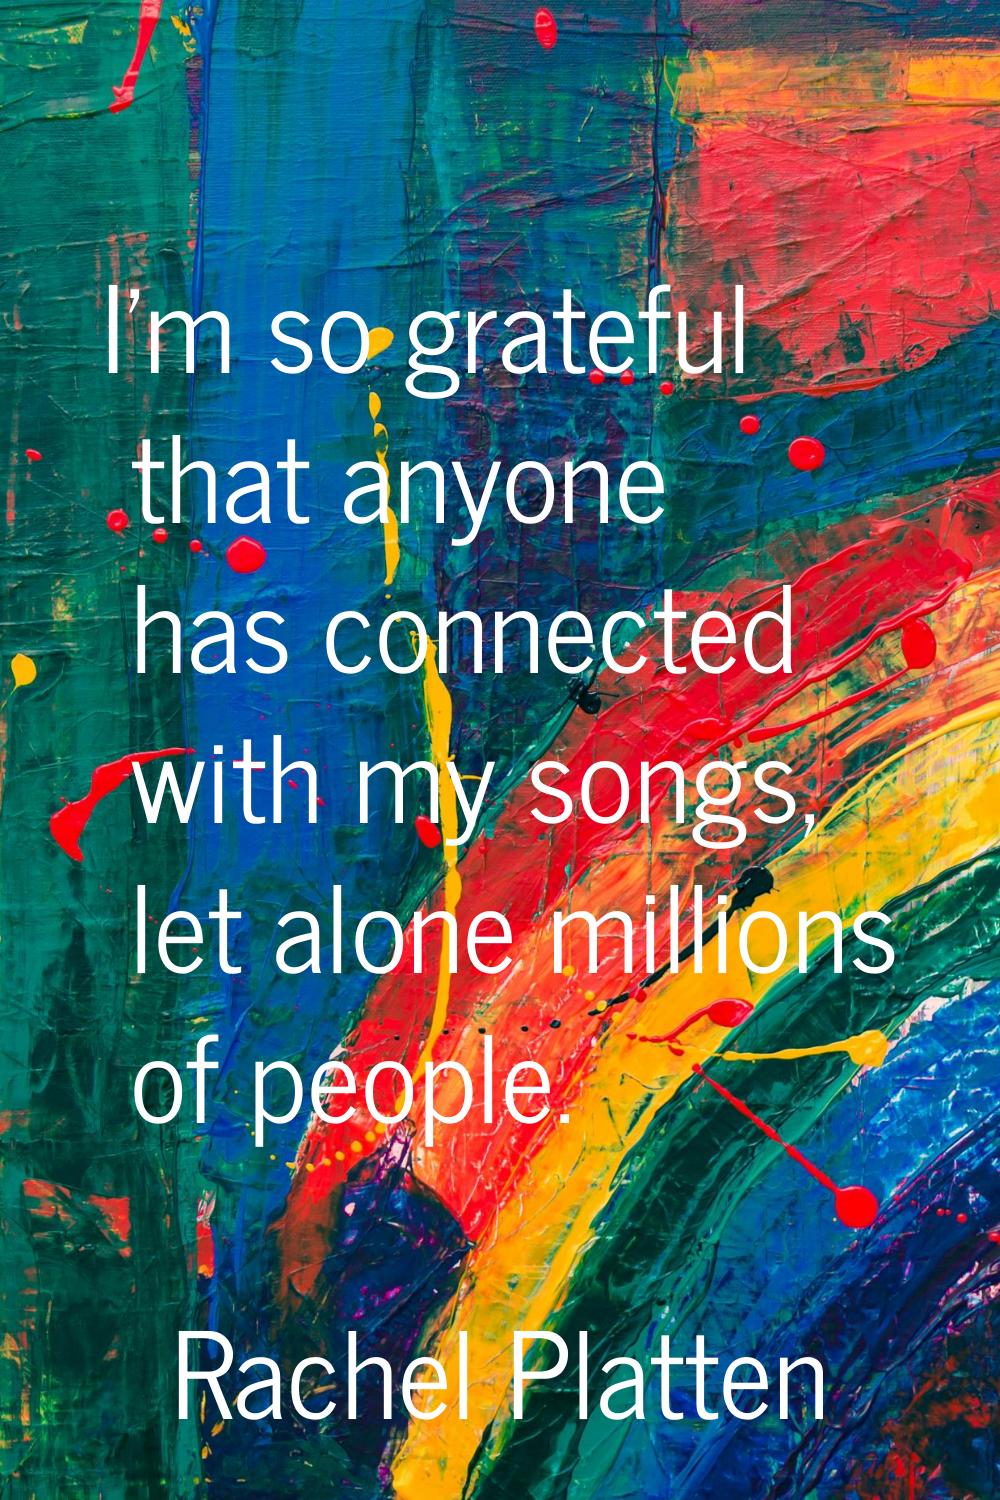 I'm so grateful that anyone has connected with my songs, let alone millions of people.